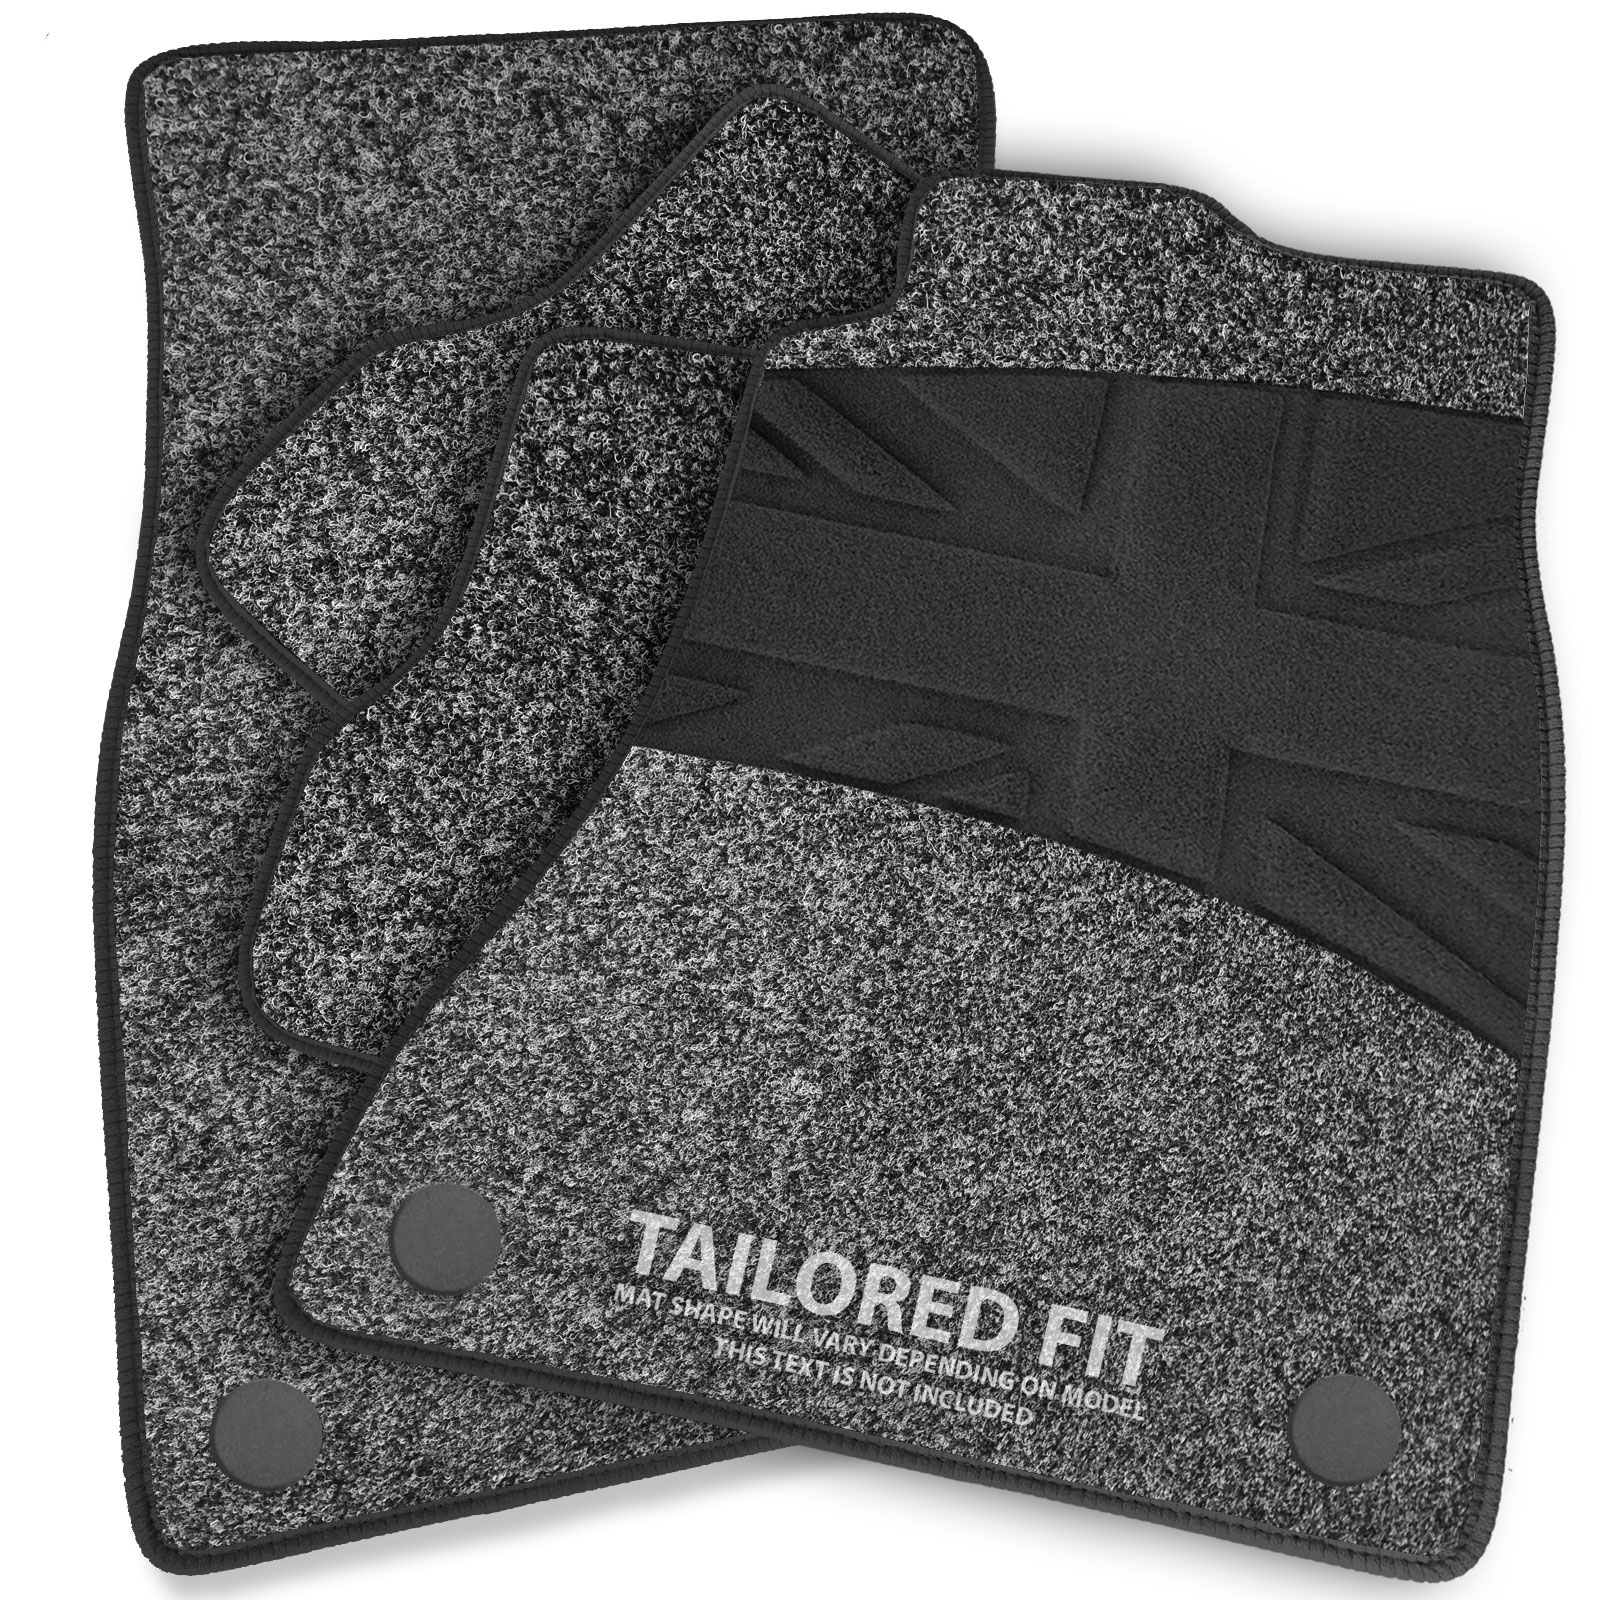 To fit Volvo V50/S40 2004-2012 Auto Tailored Car Mats Anthracite